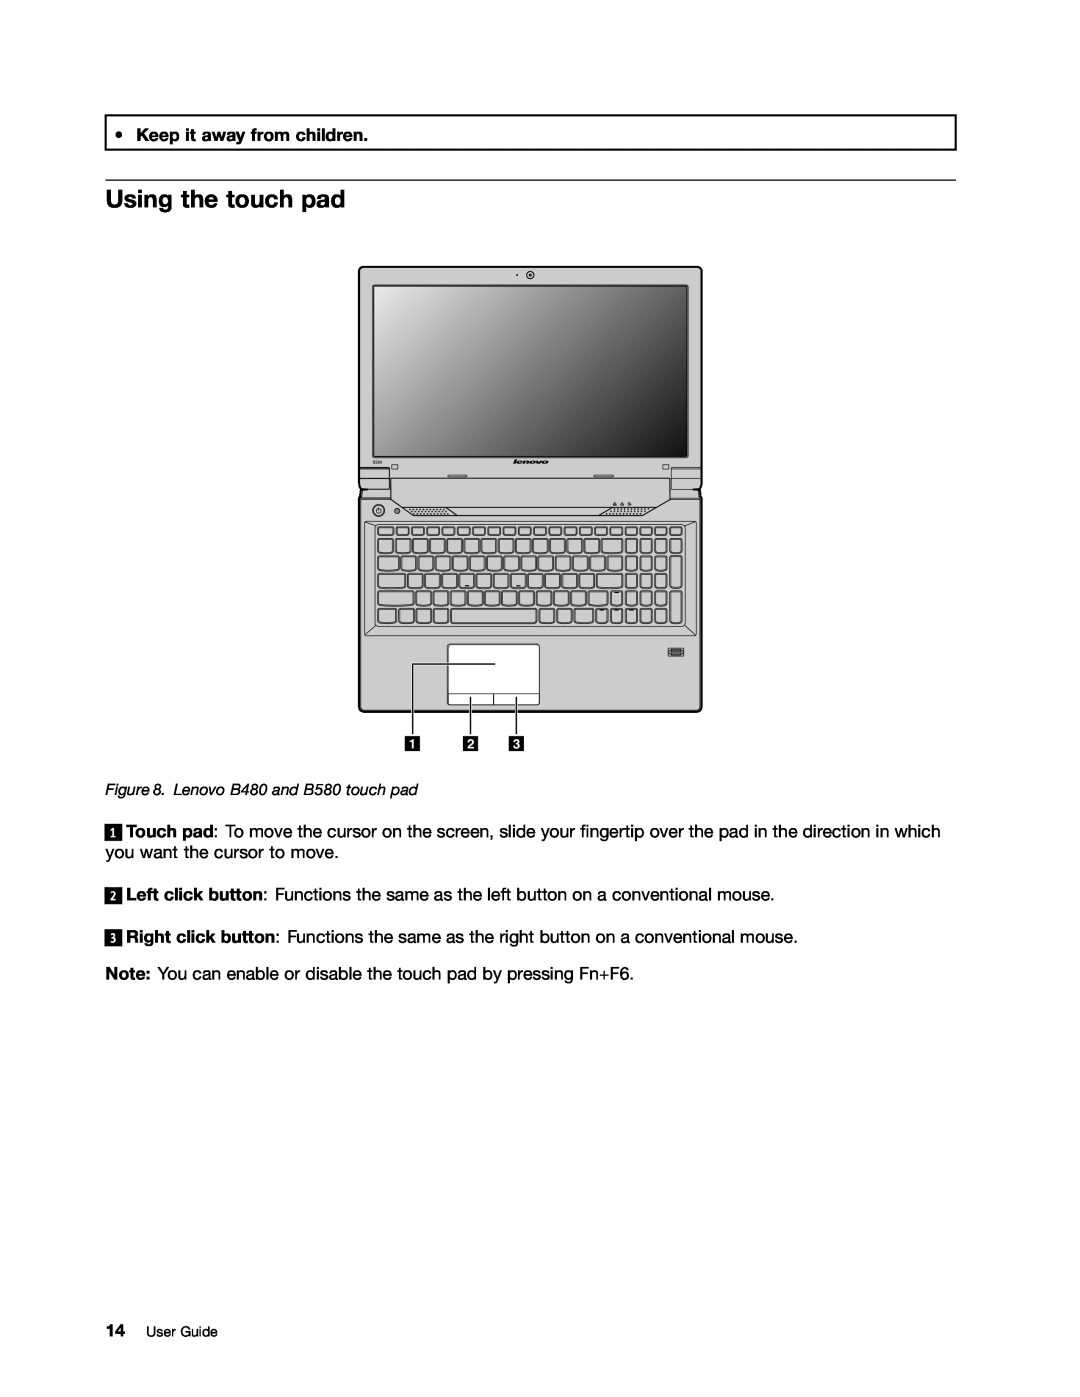 Lenovo B480, B580 manual Using the touch pad, Keep it away from children 